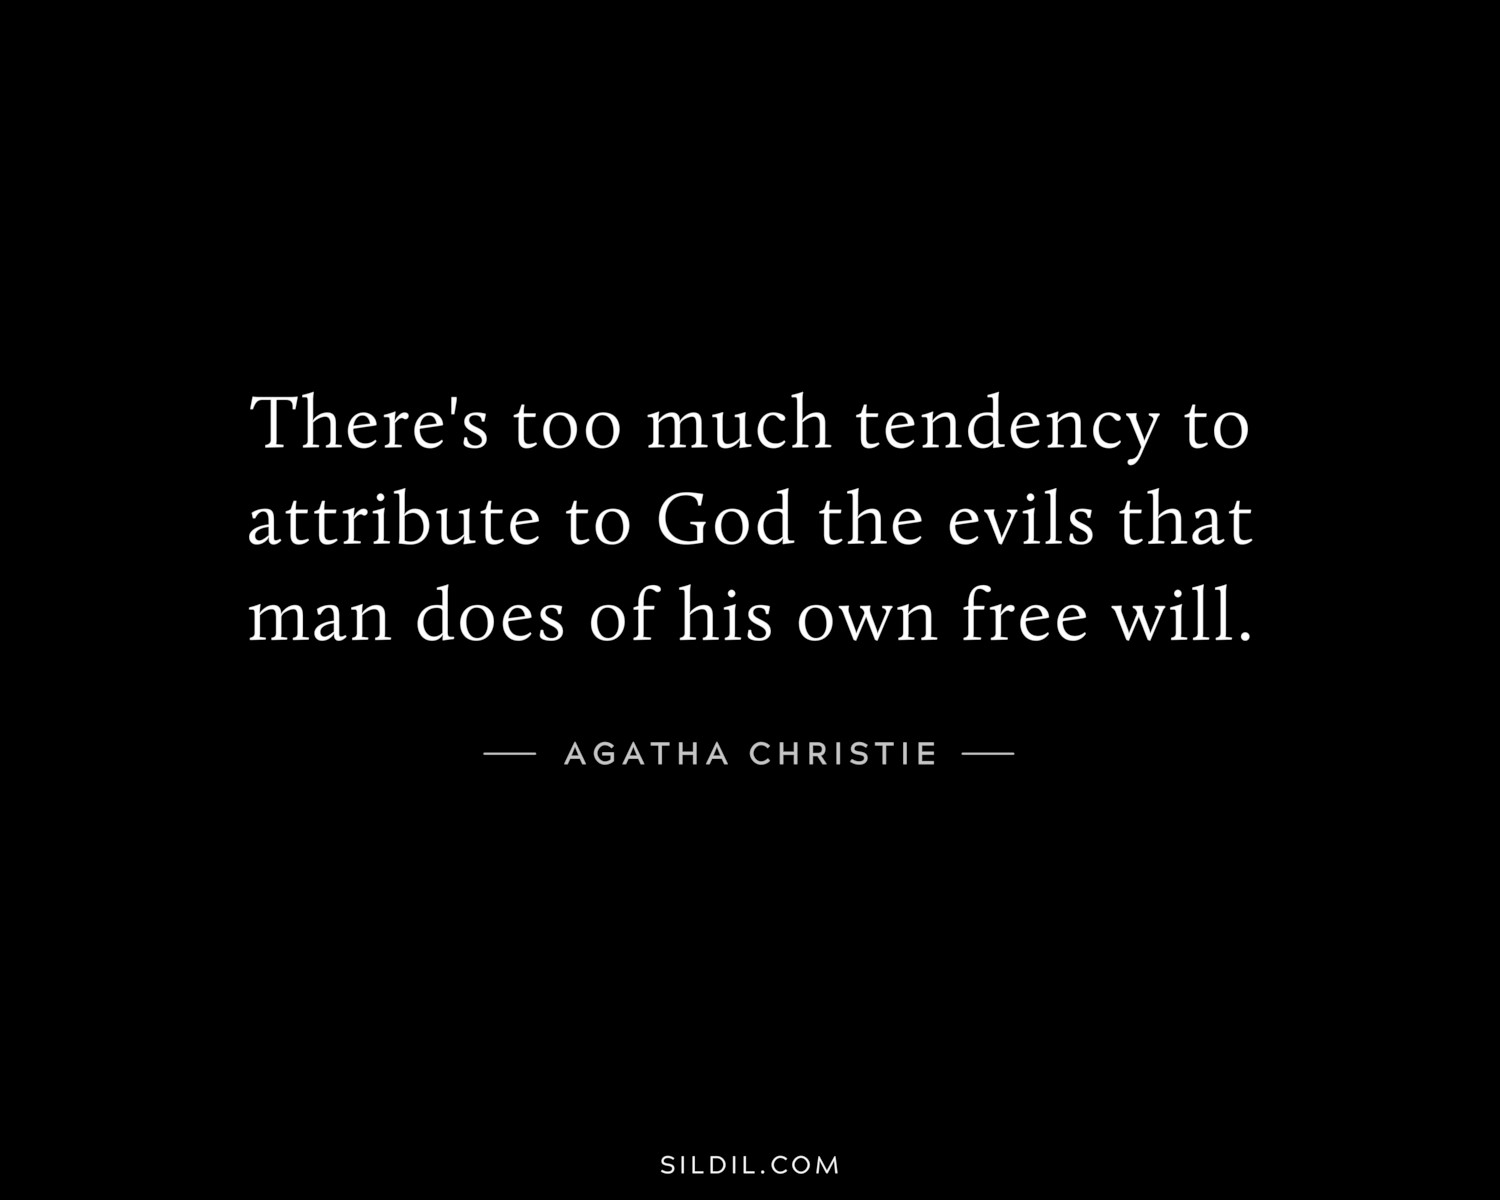 There's too much tendency to attribute to God the evils that man does of his own free will.